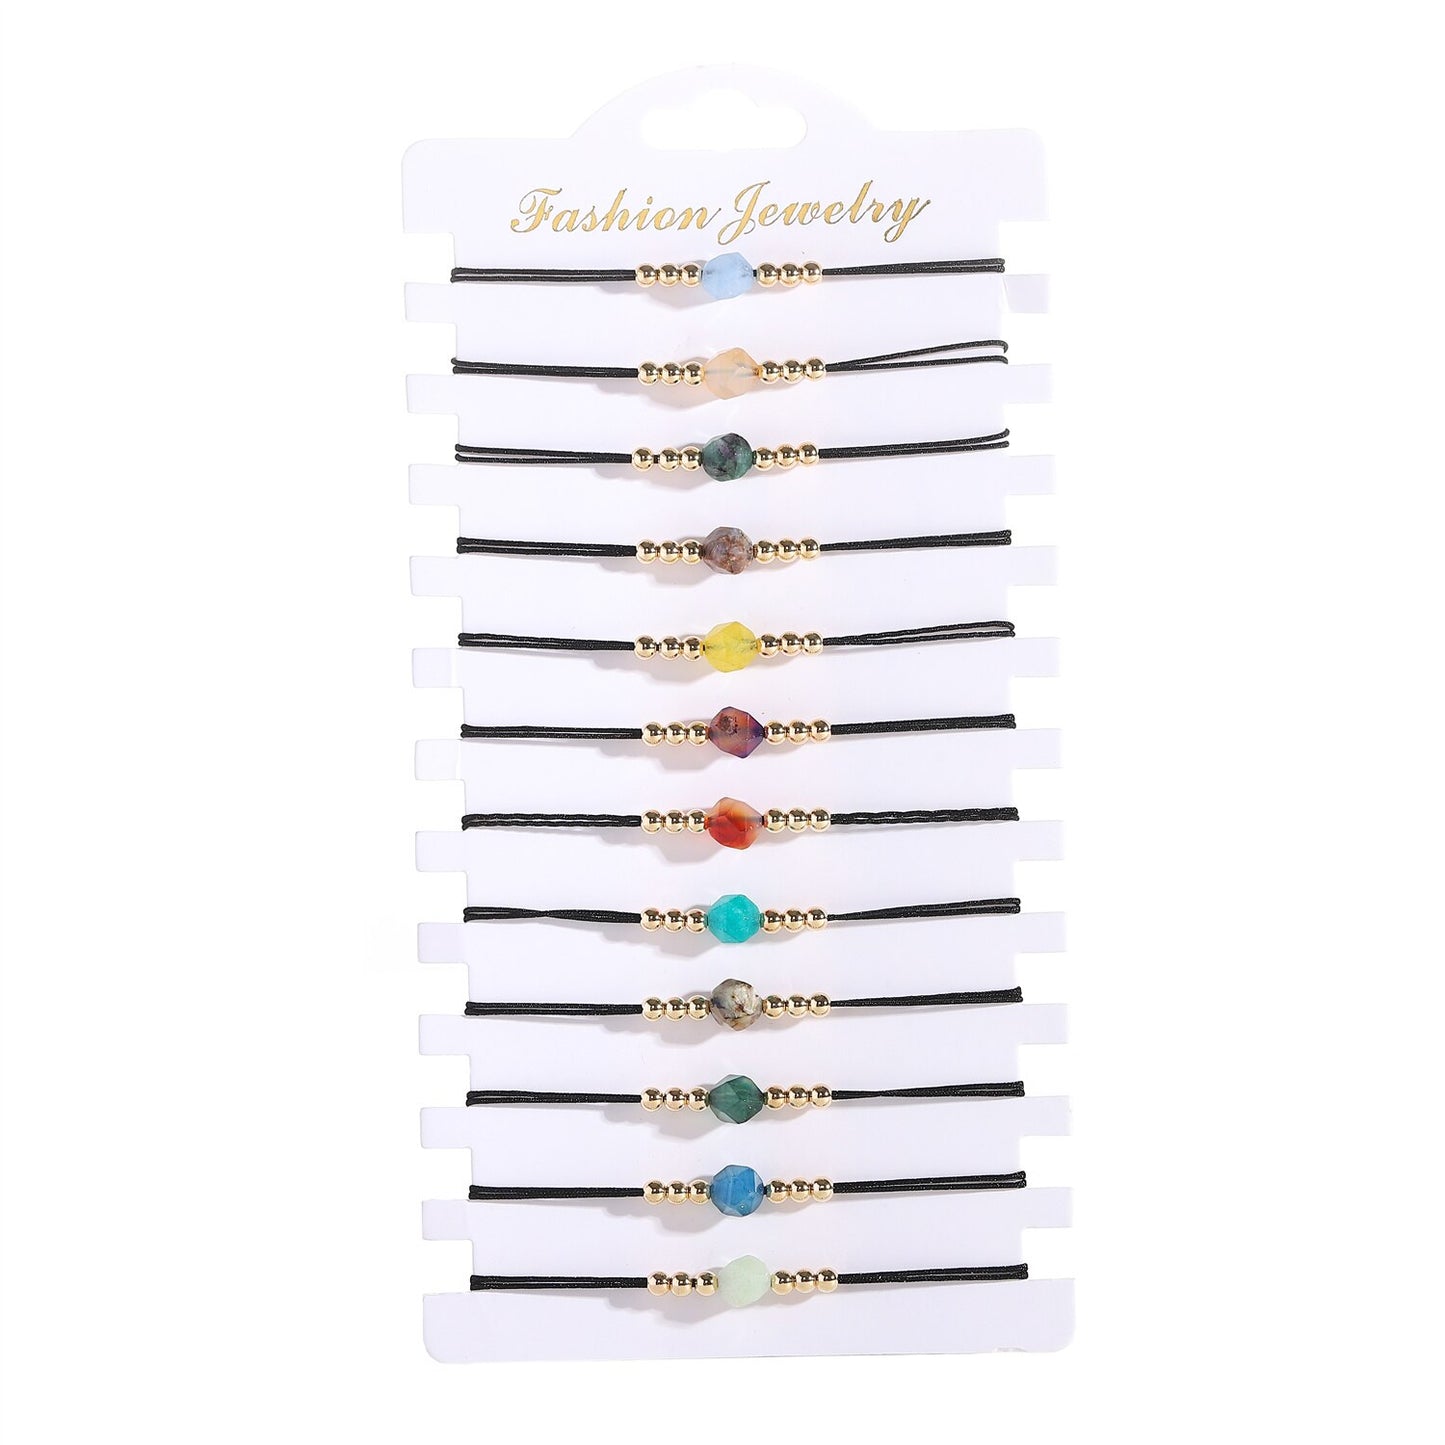 12pcs/lot Natural Stone Faceted Beads Braided Bracelets for Women Adjustable Rope Chain Anklets Beach Handmade Wristband Jewelry